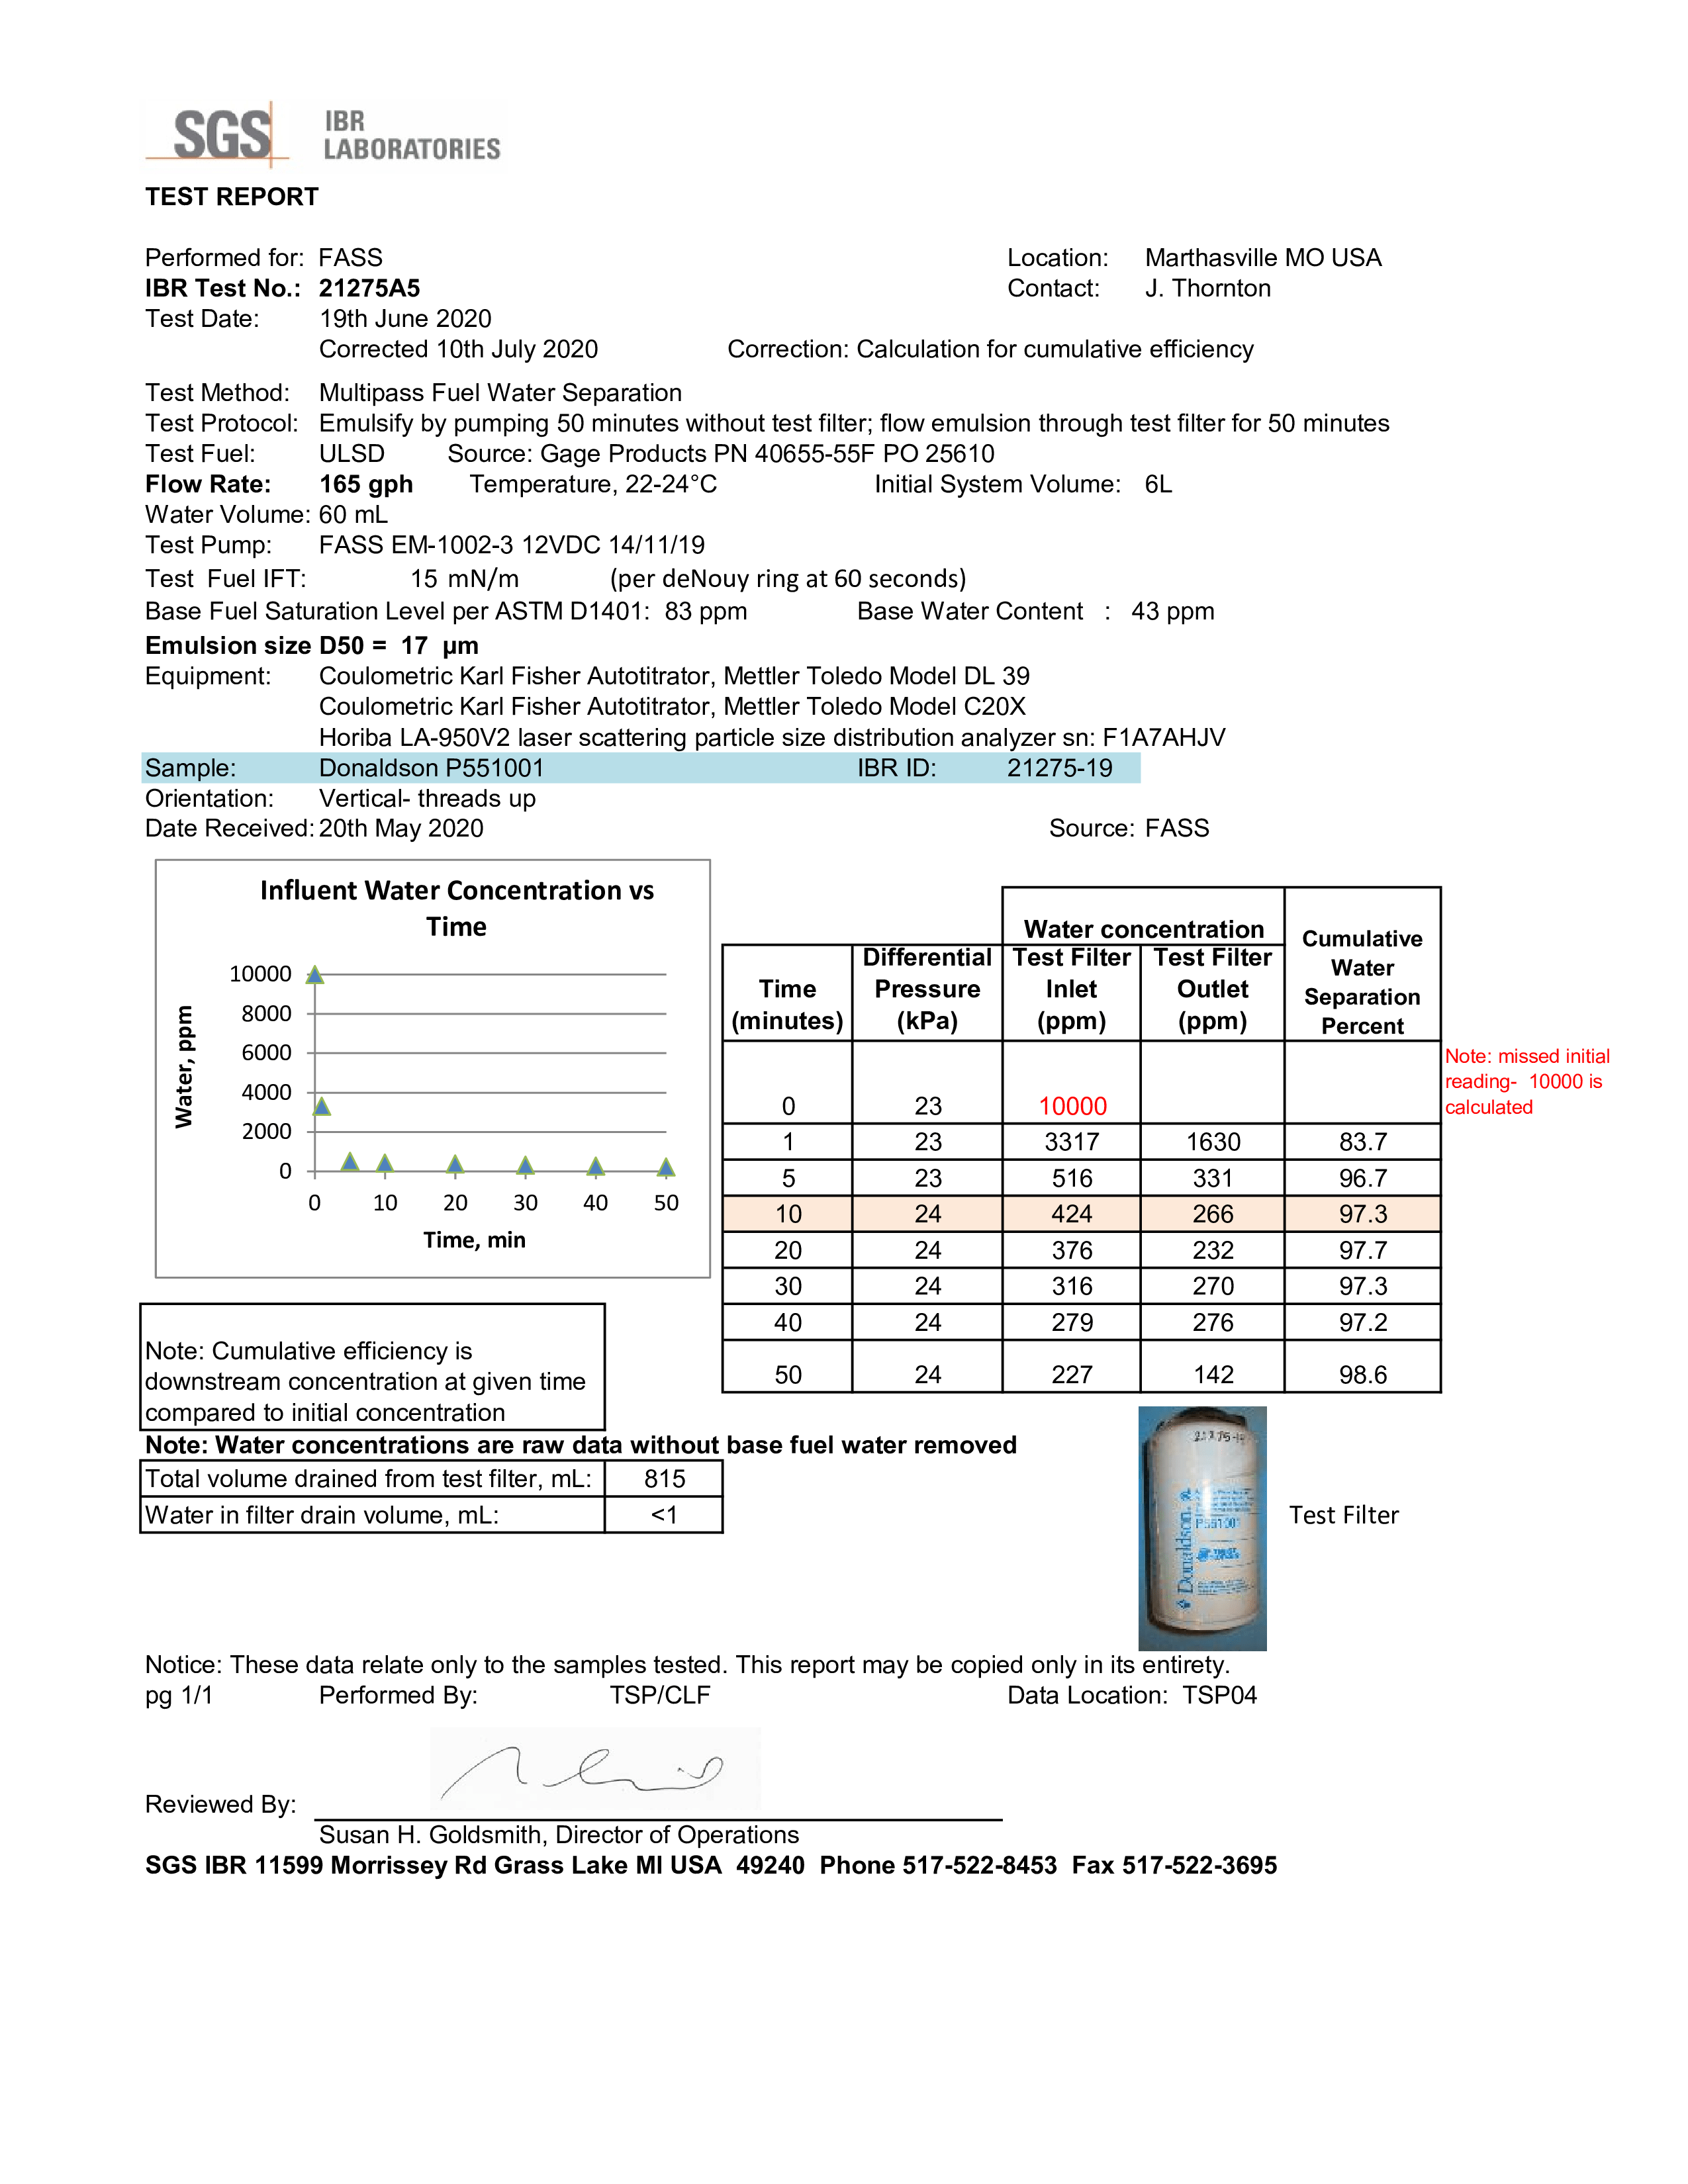 Donaldson P551001 fuel filter test results